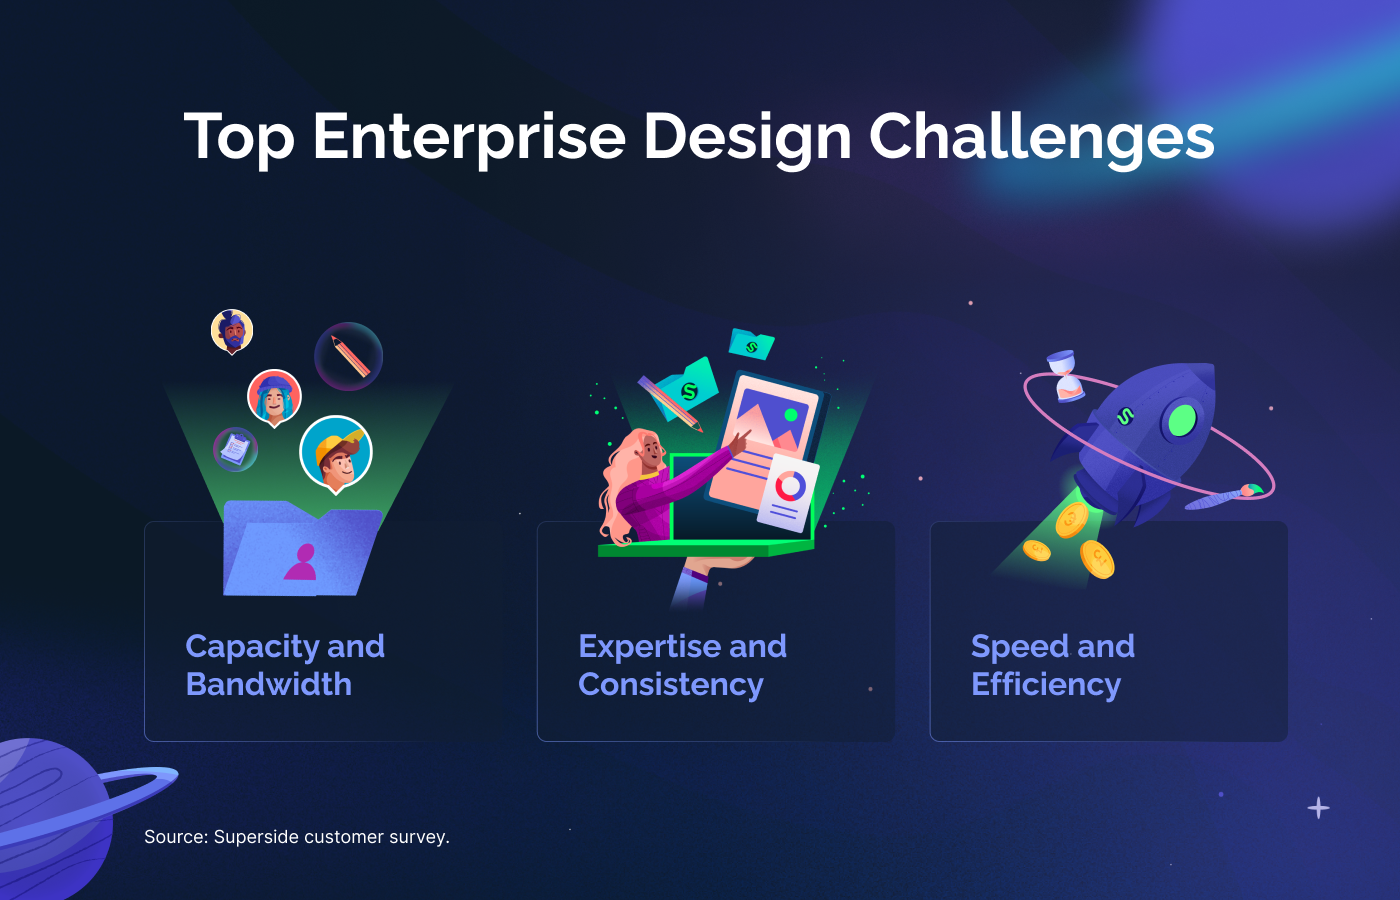 An infographic that lists the top enterprise design challenges: Capacity and bandwidth, expertise and consistency and speed and efficiency.  